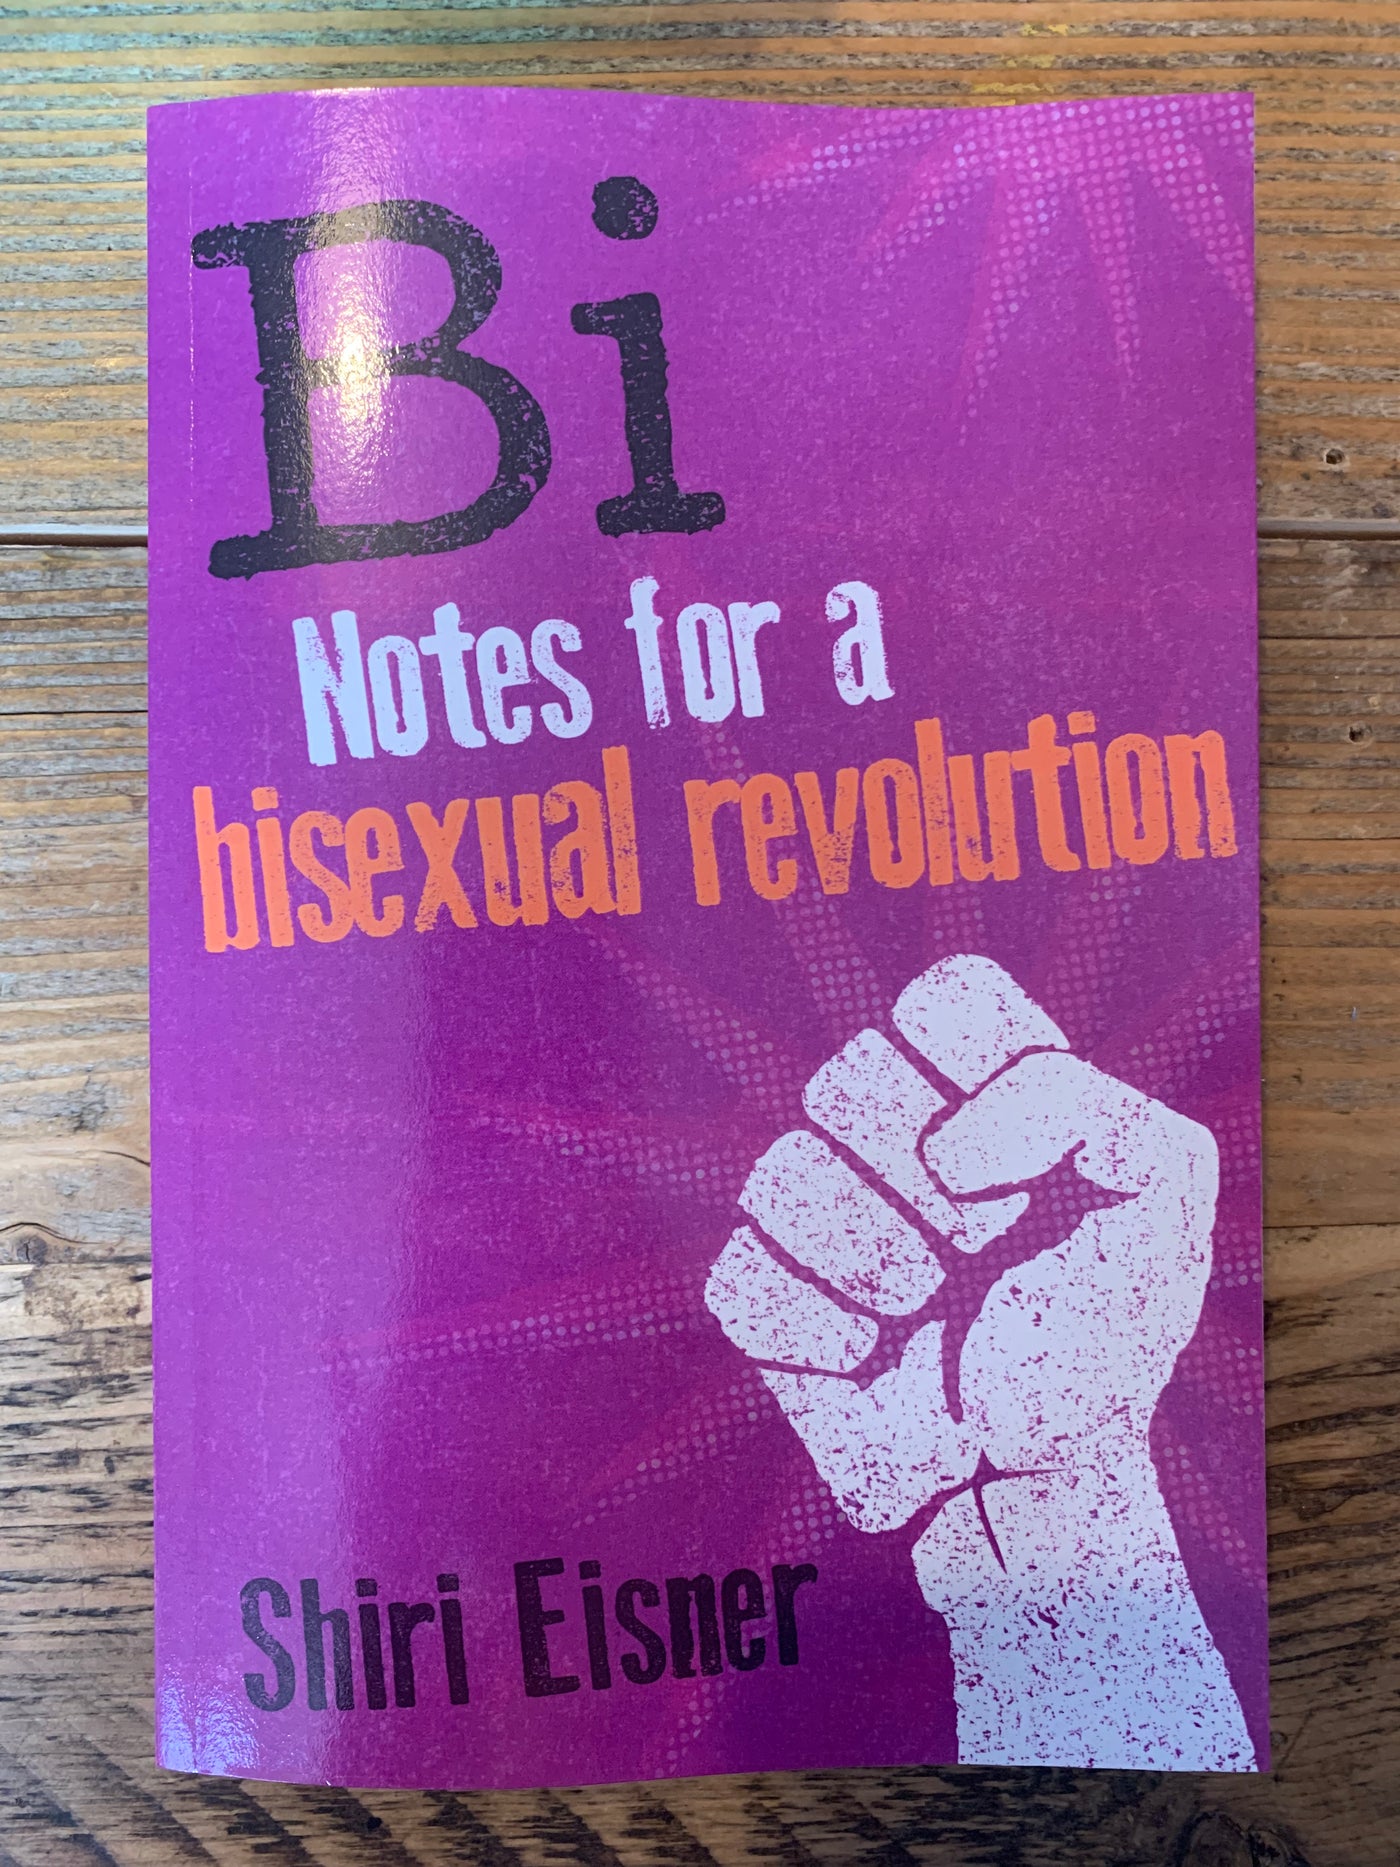 Bi: Notes for a Bisexual Revolution